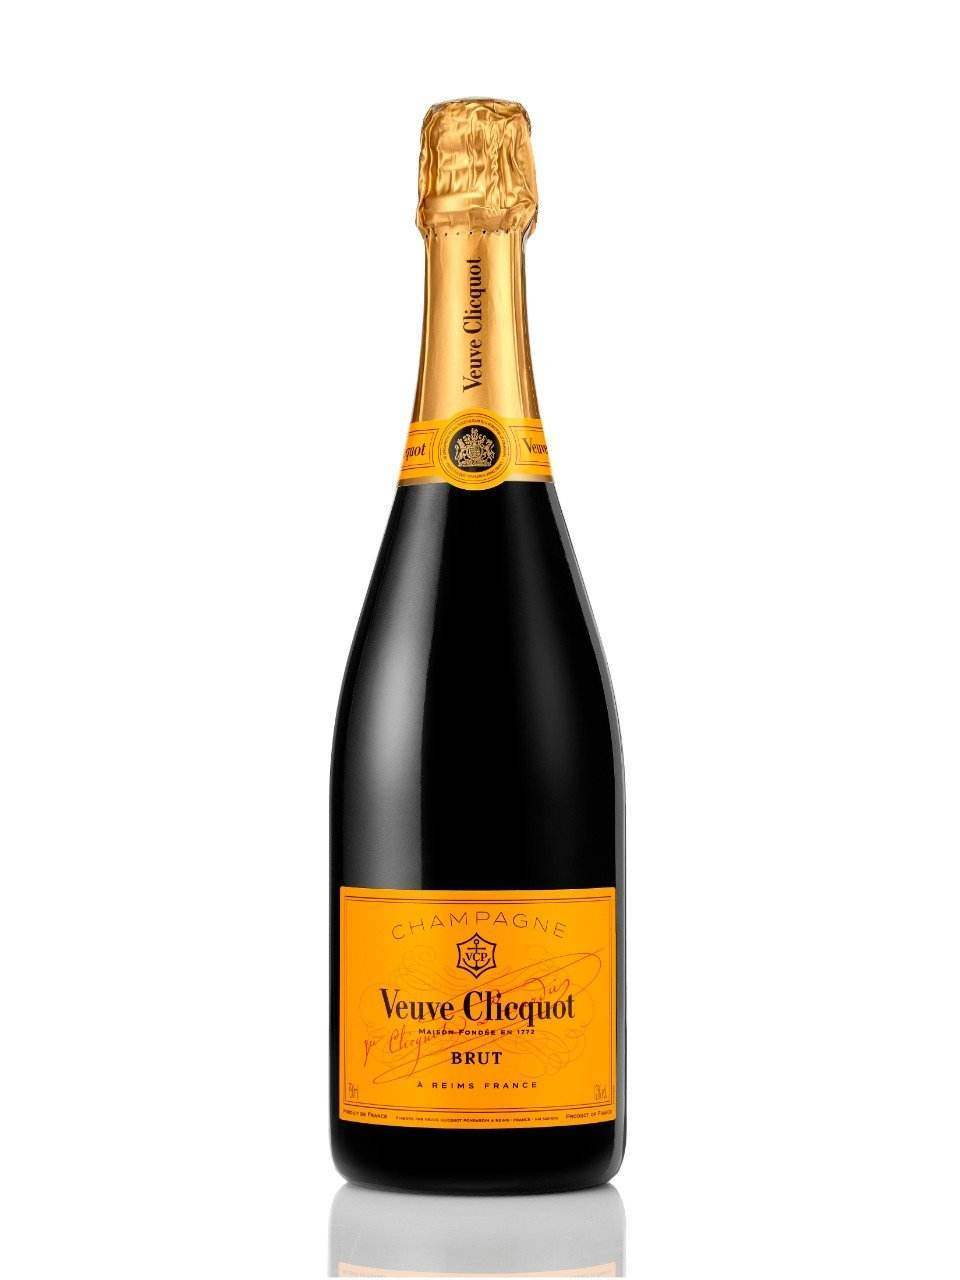 Veuve Clicquot Brut Yellow Label Champagne | Exquisite Wine & Alcohol Gift Delivery Toronto Canada | Vyno